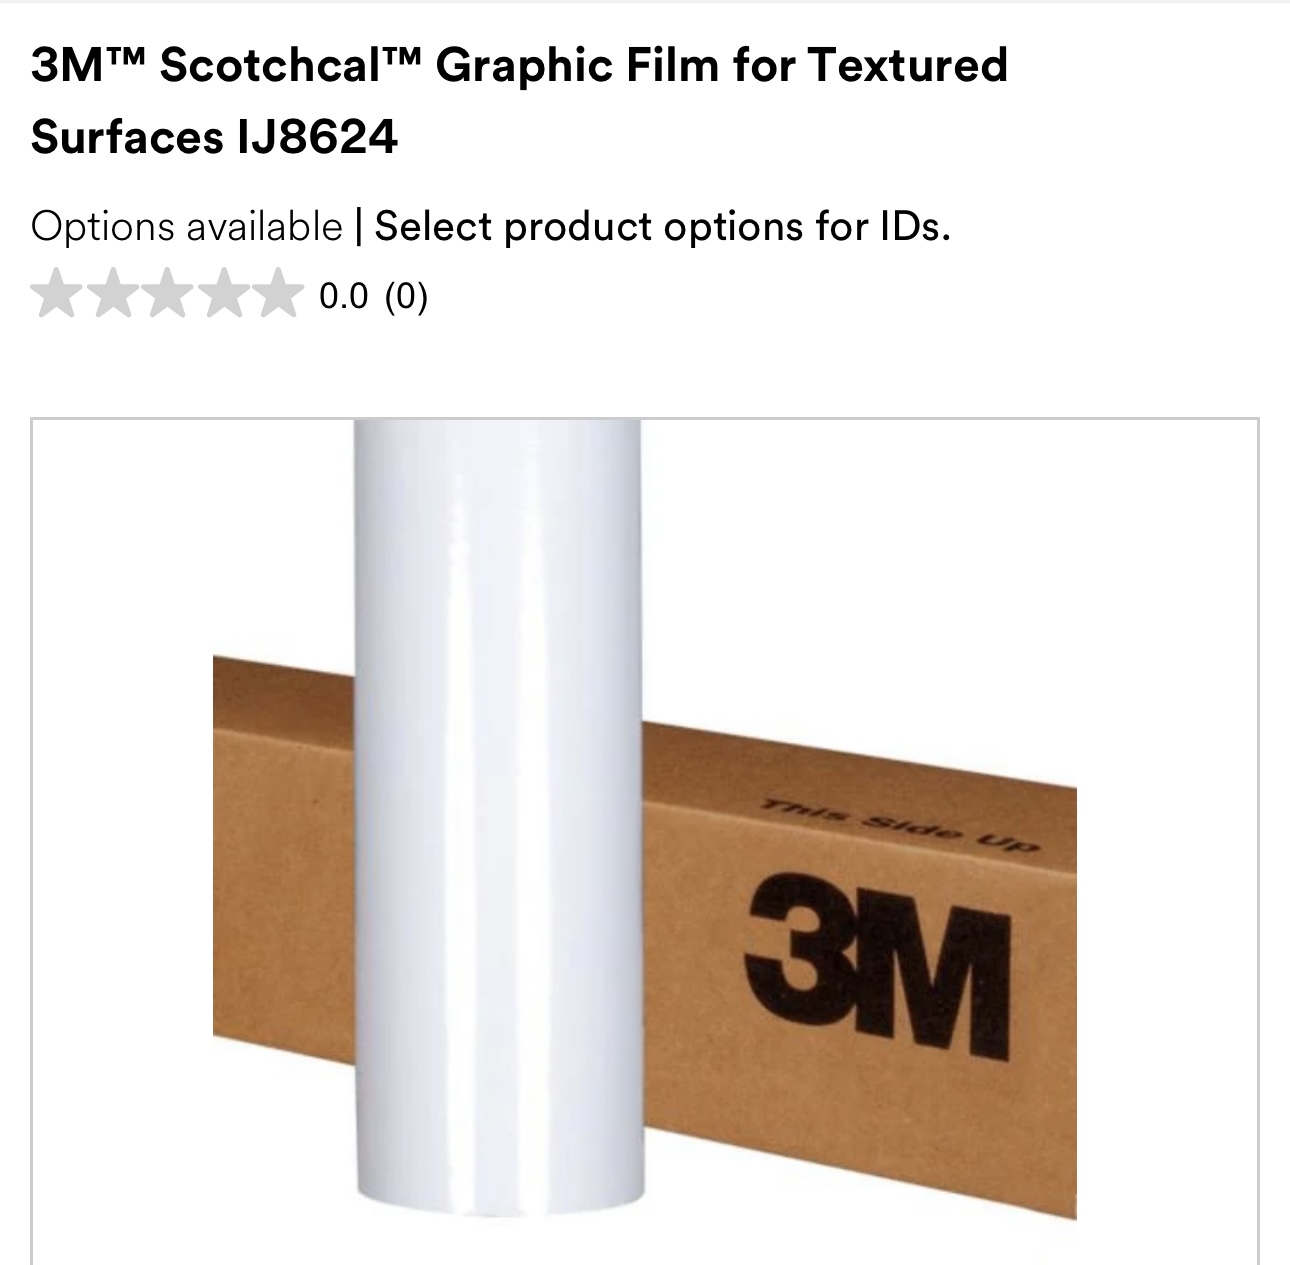 Protect interior with 3M clear bra film?